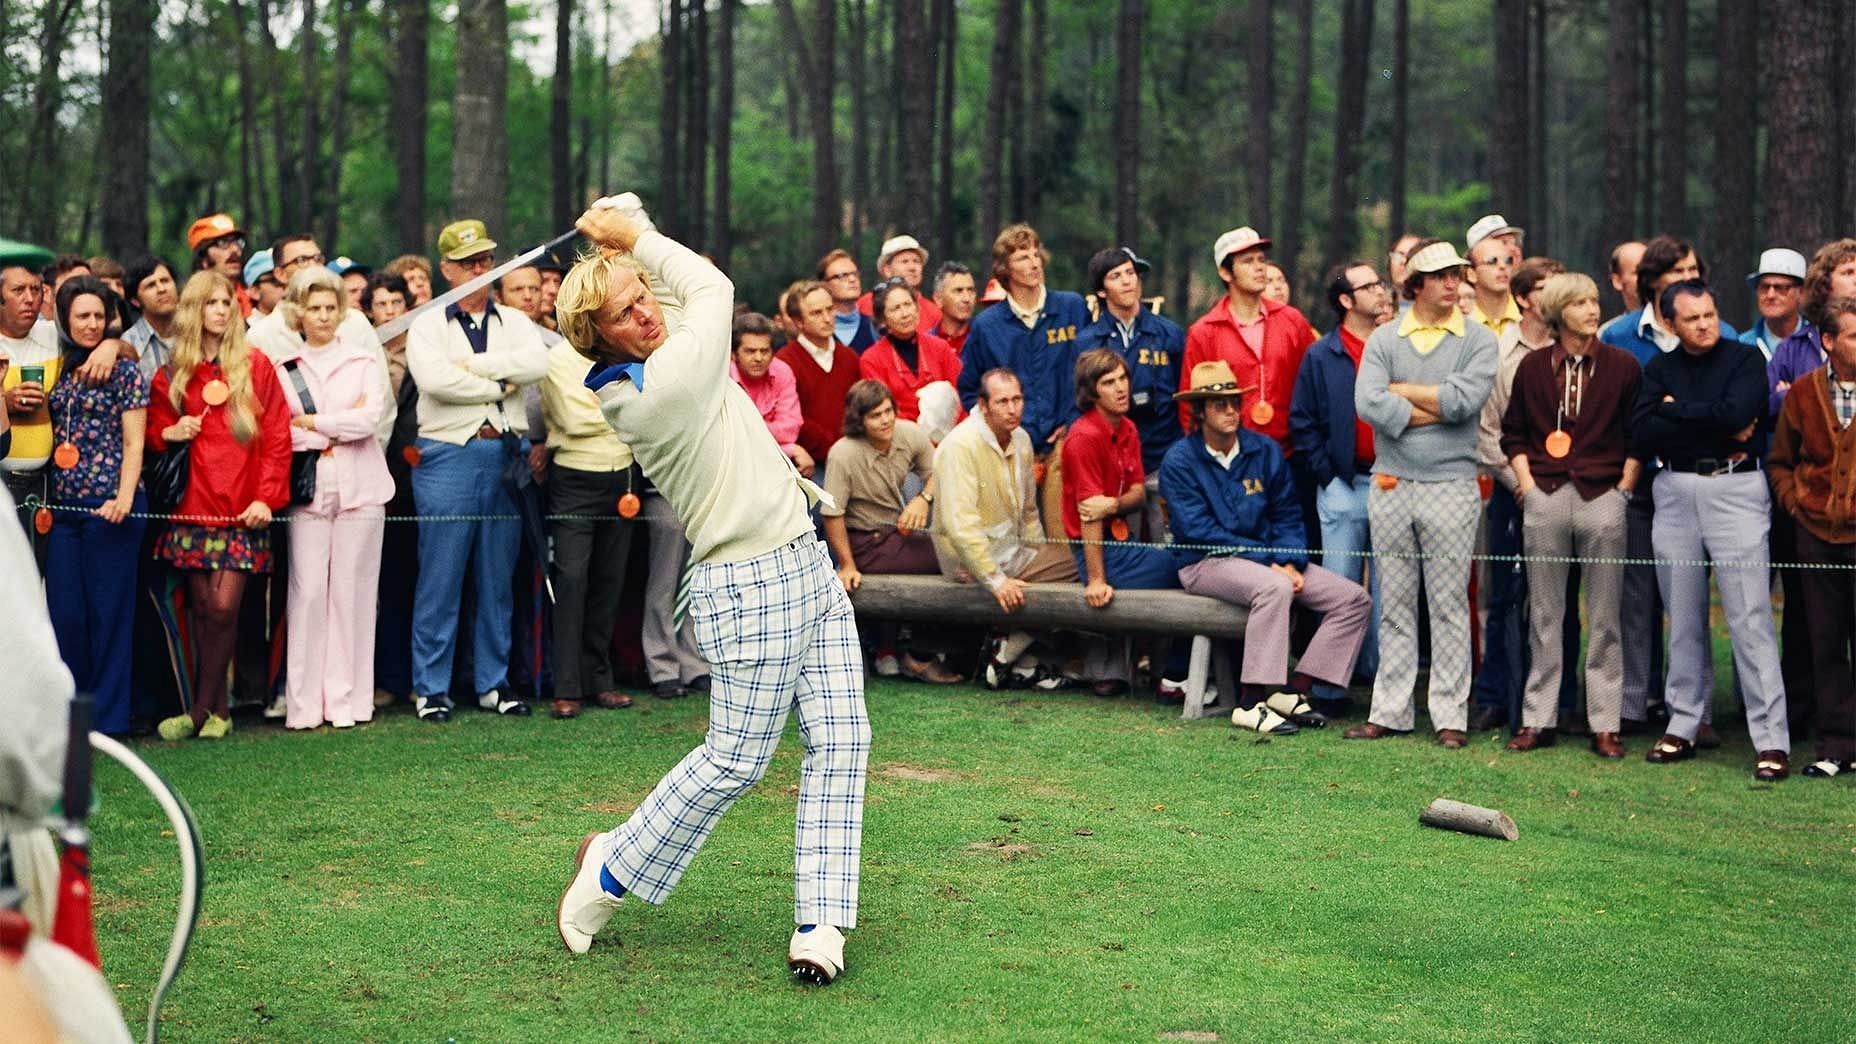 Jack Nicklaus playing shot during 1971 Masters, which he eventually won